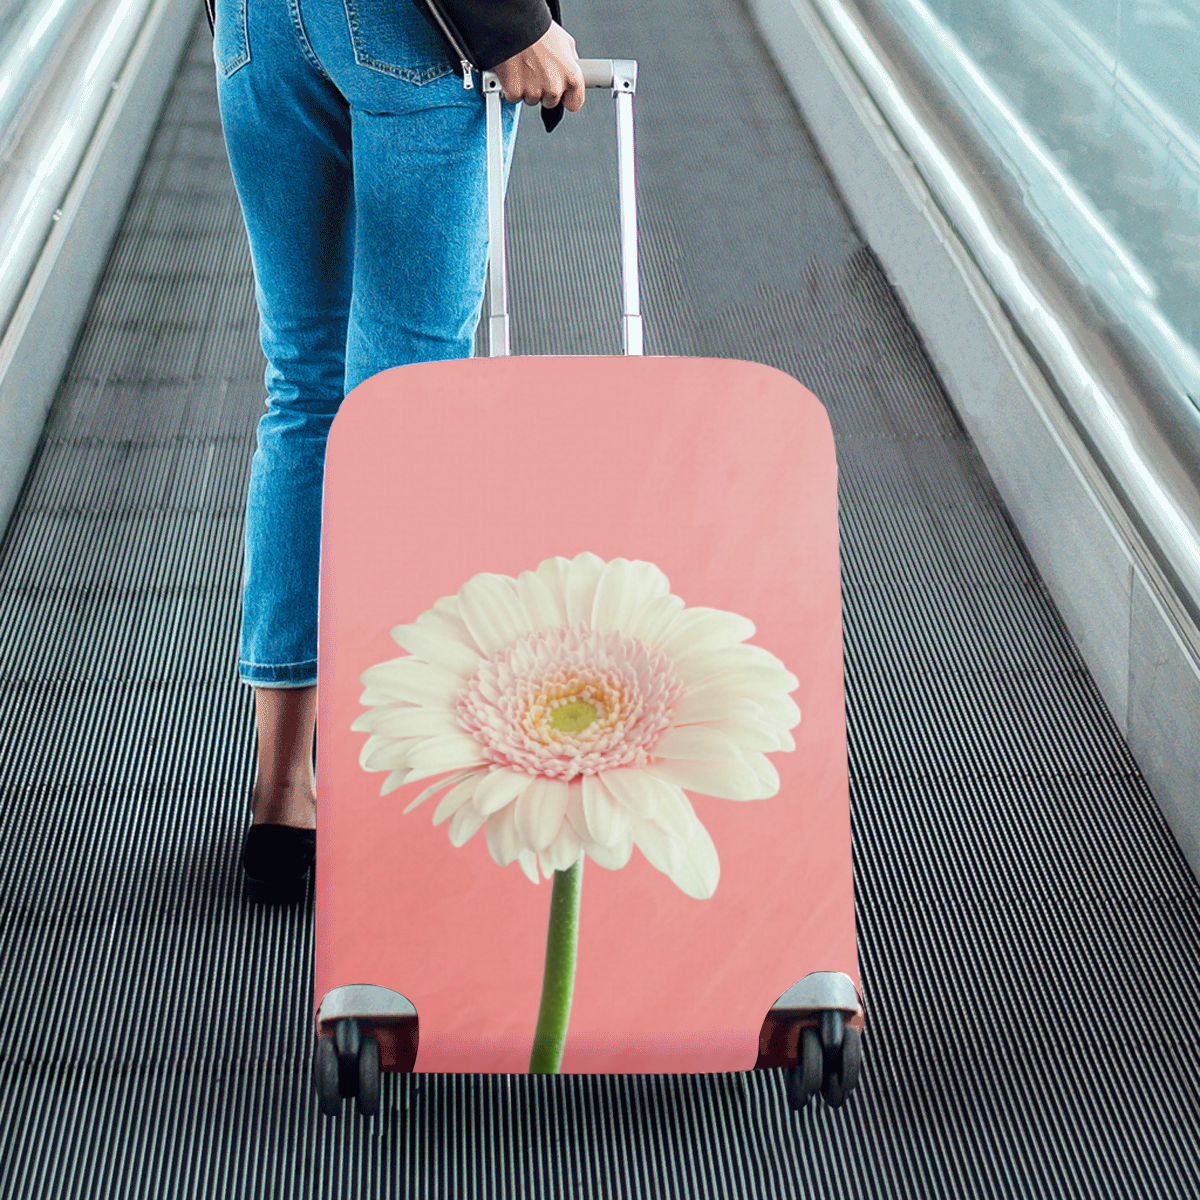 Gerbera Daisy - White Flower on Coral Pink Luggage Cover/Medium 22"-25"